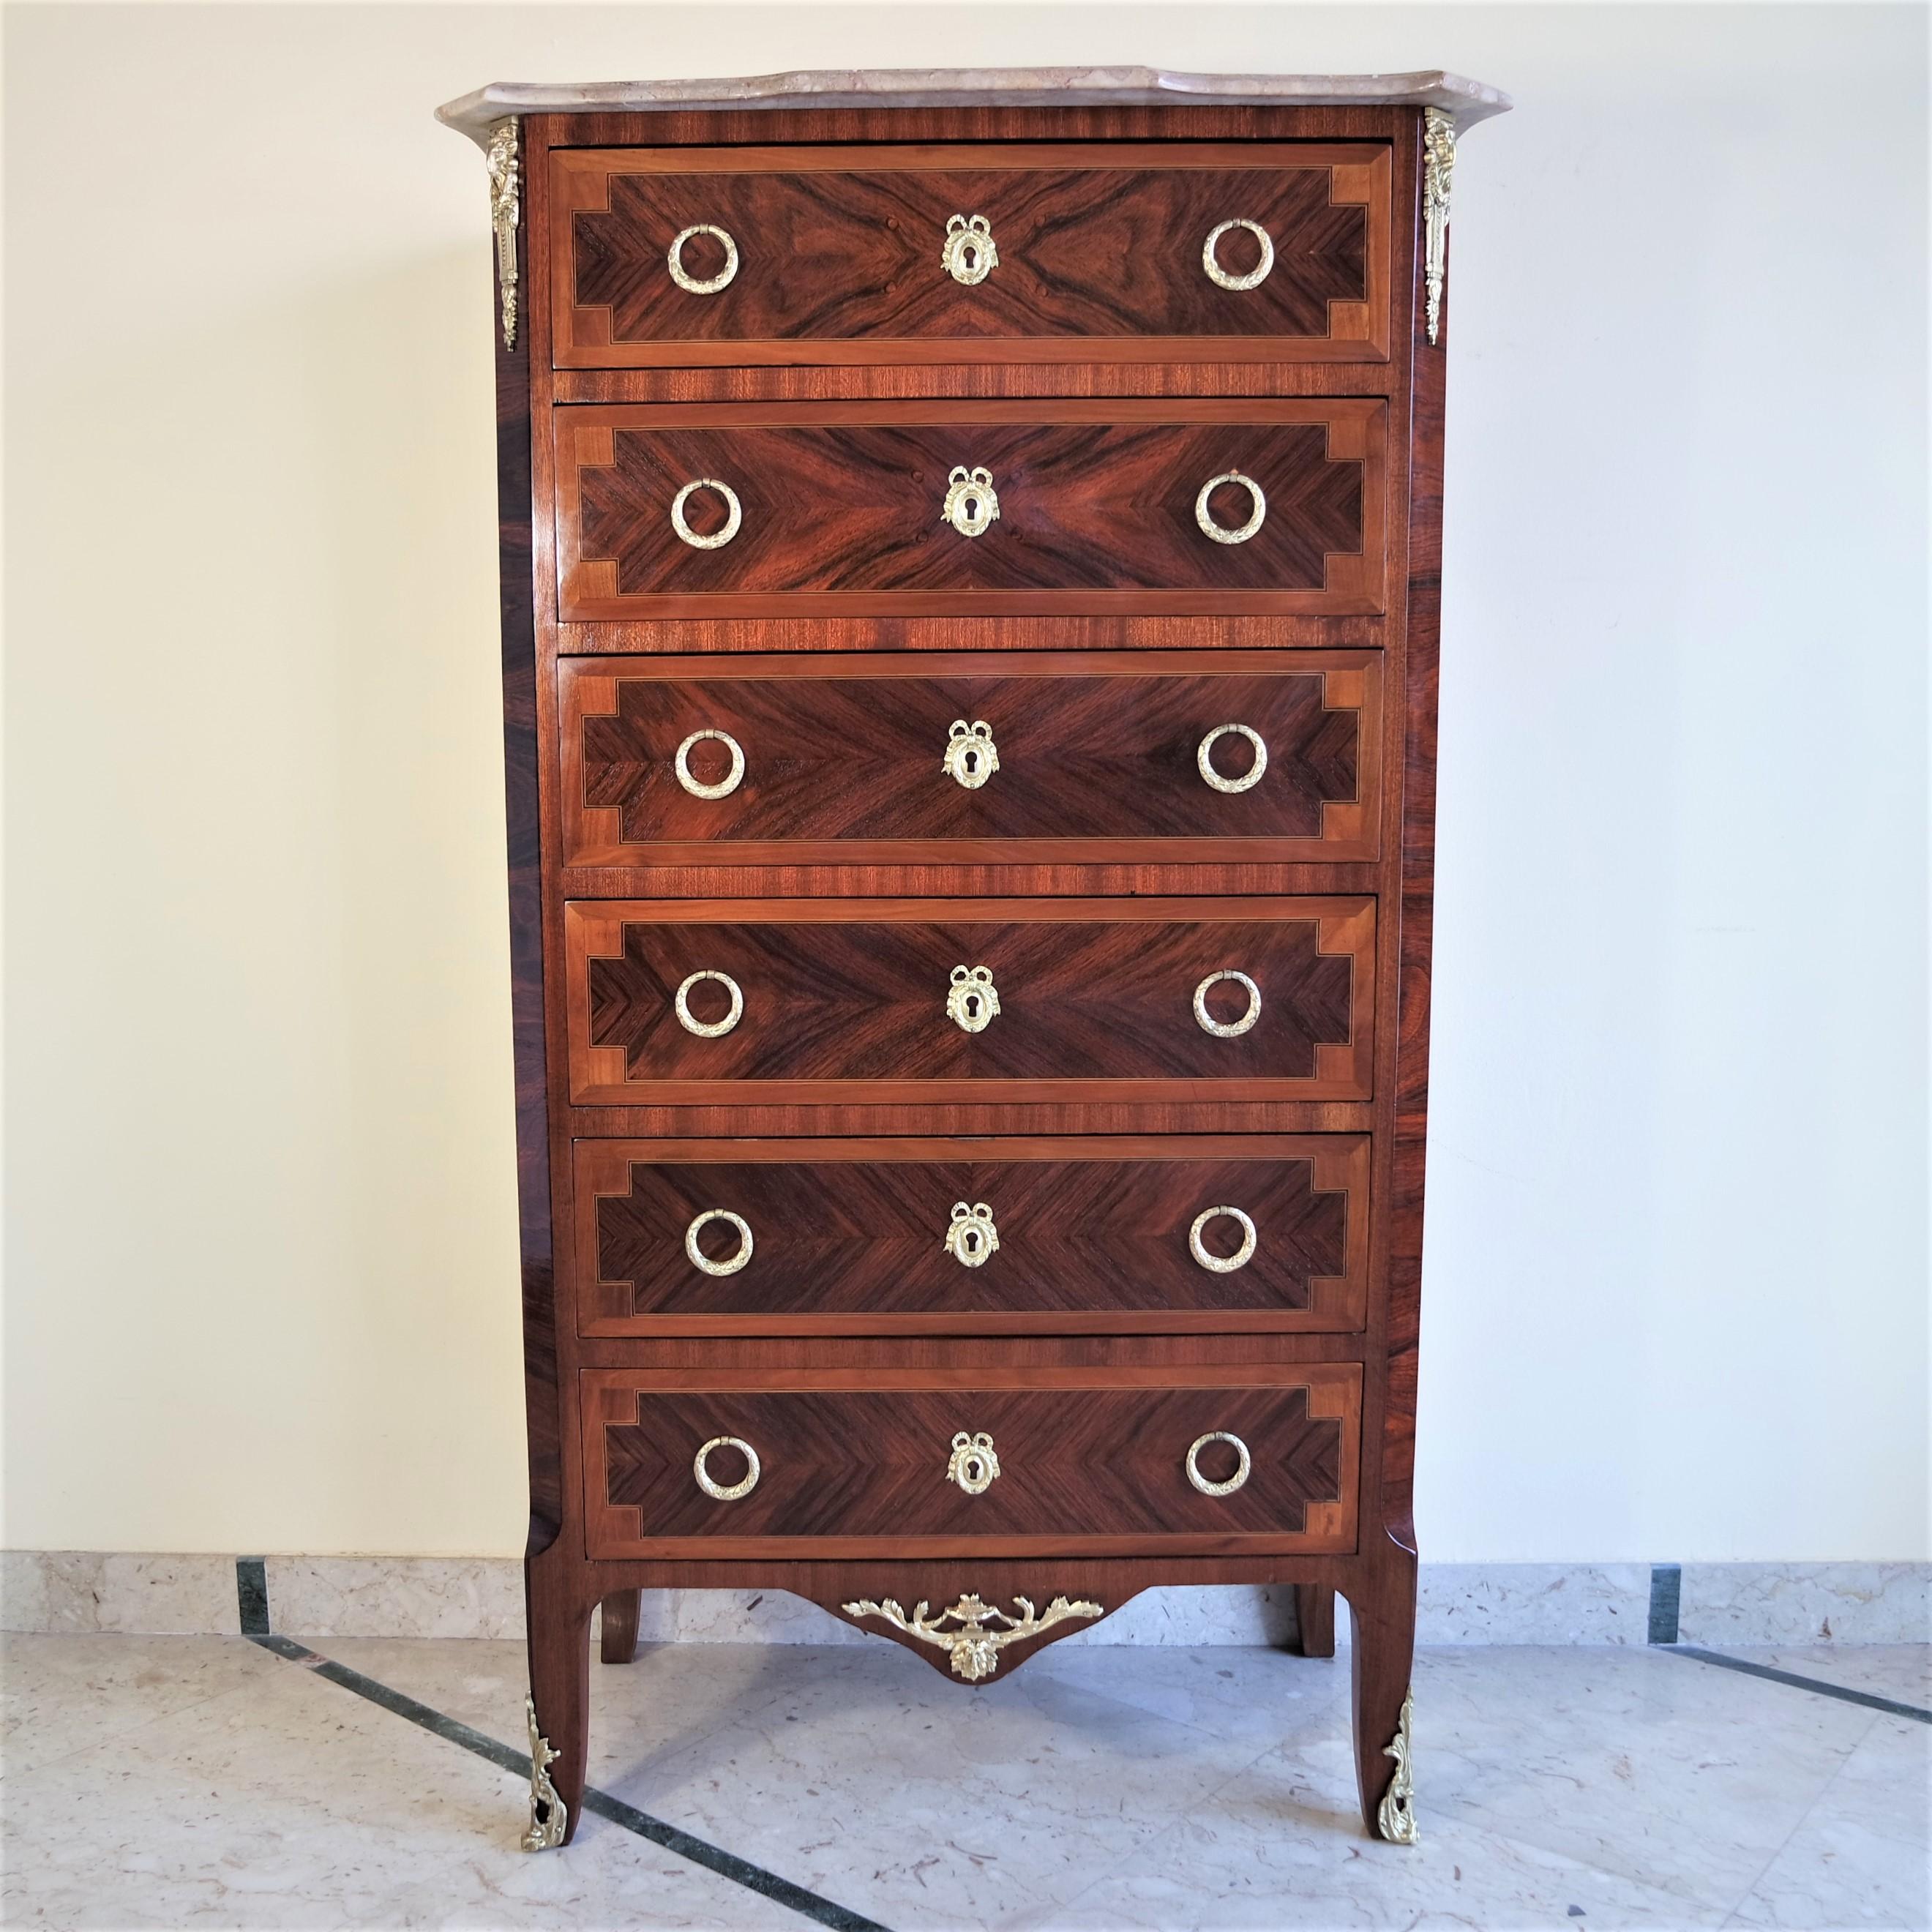 20th century, French chest of drawers in kingwood.
On the top, it has a veined marble. 
Cabinet with beautiful proportions and drawers embellished with bronzed handles.
Restored and in good conditions.